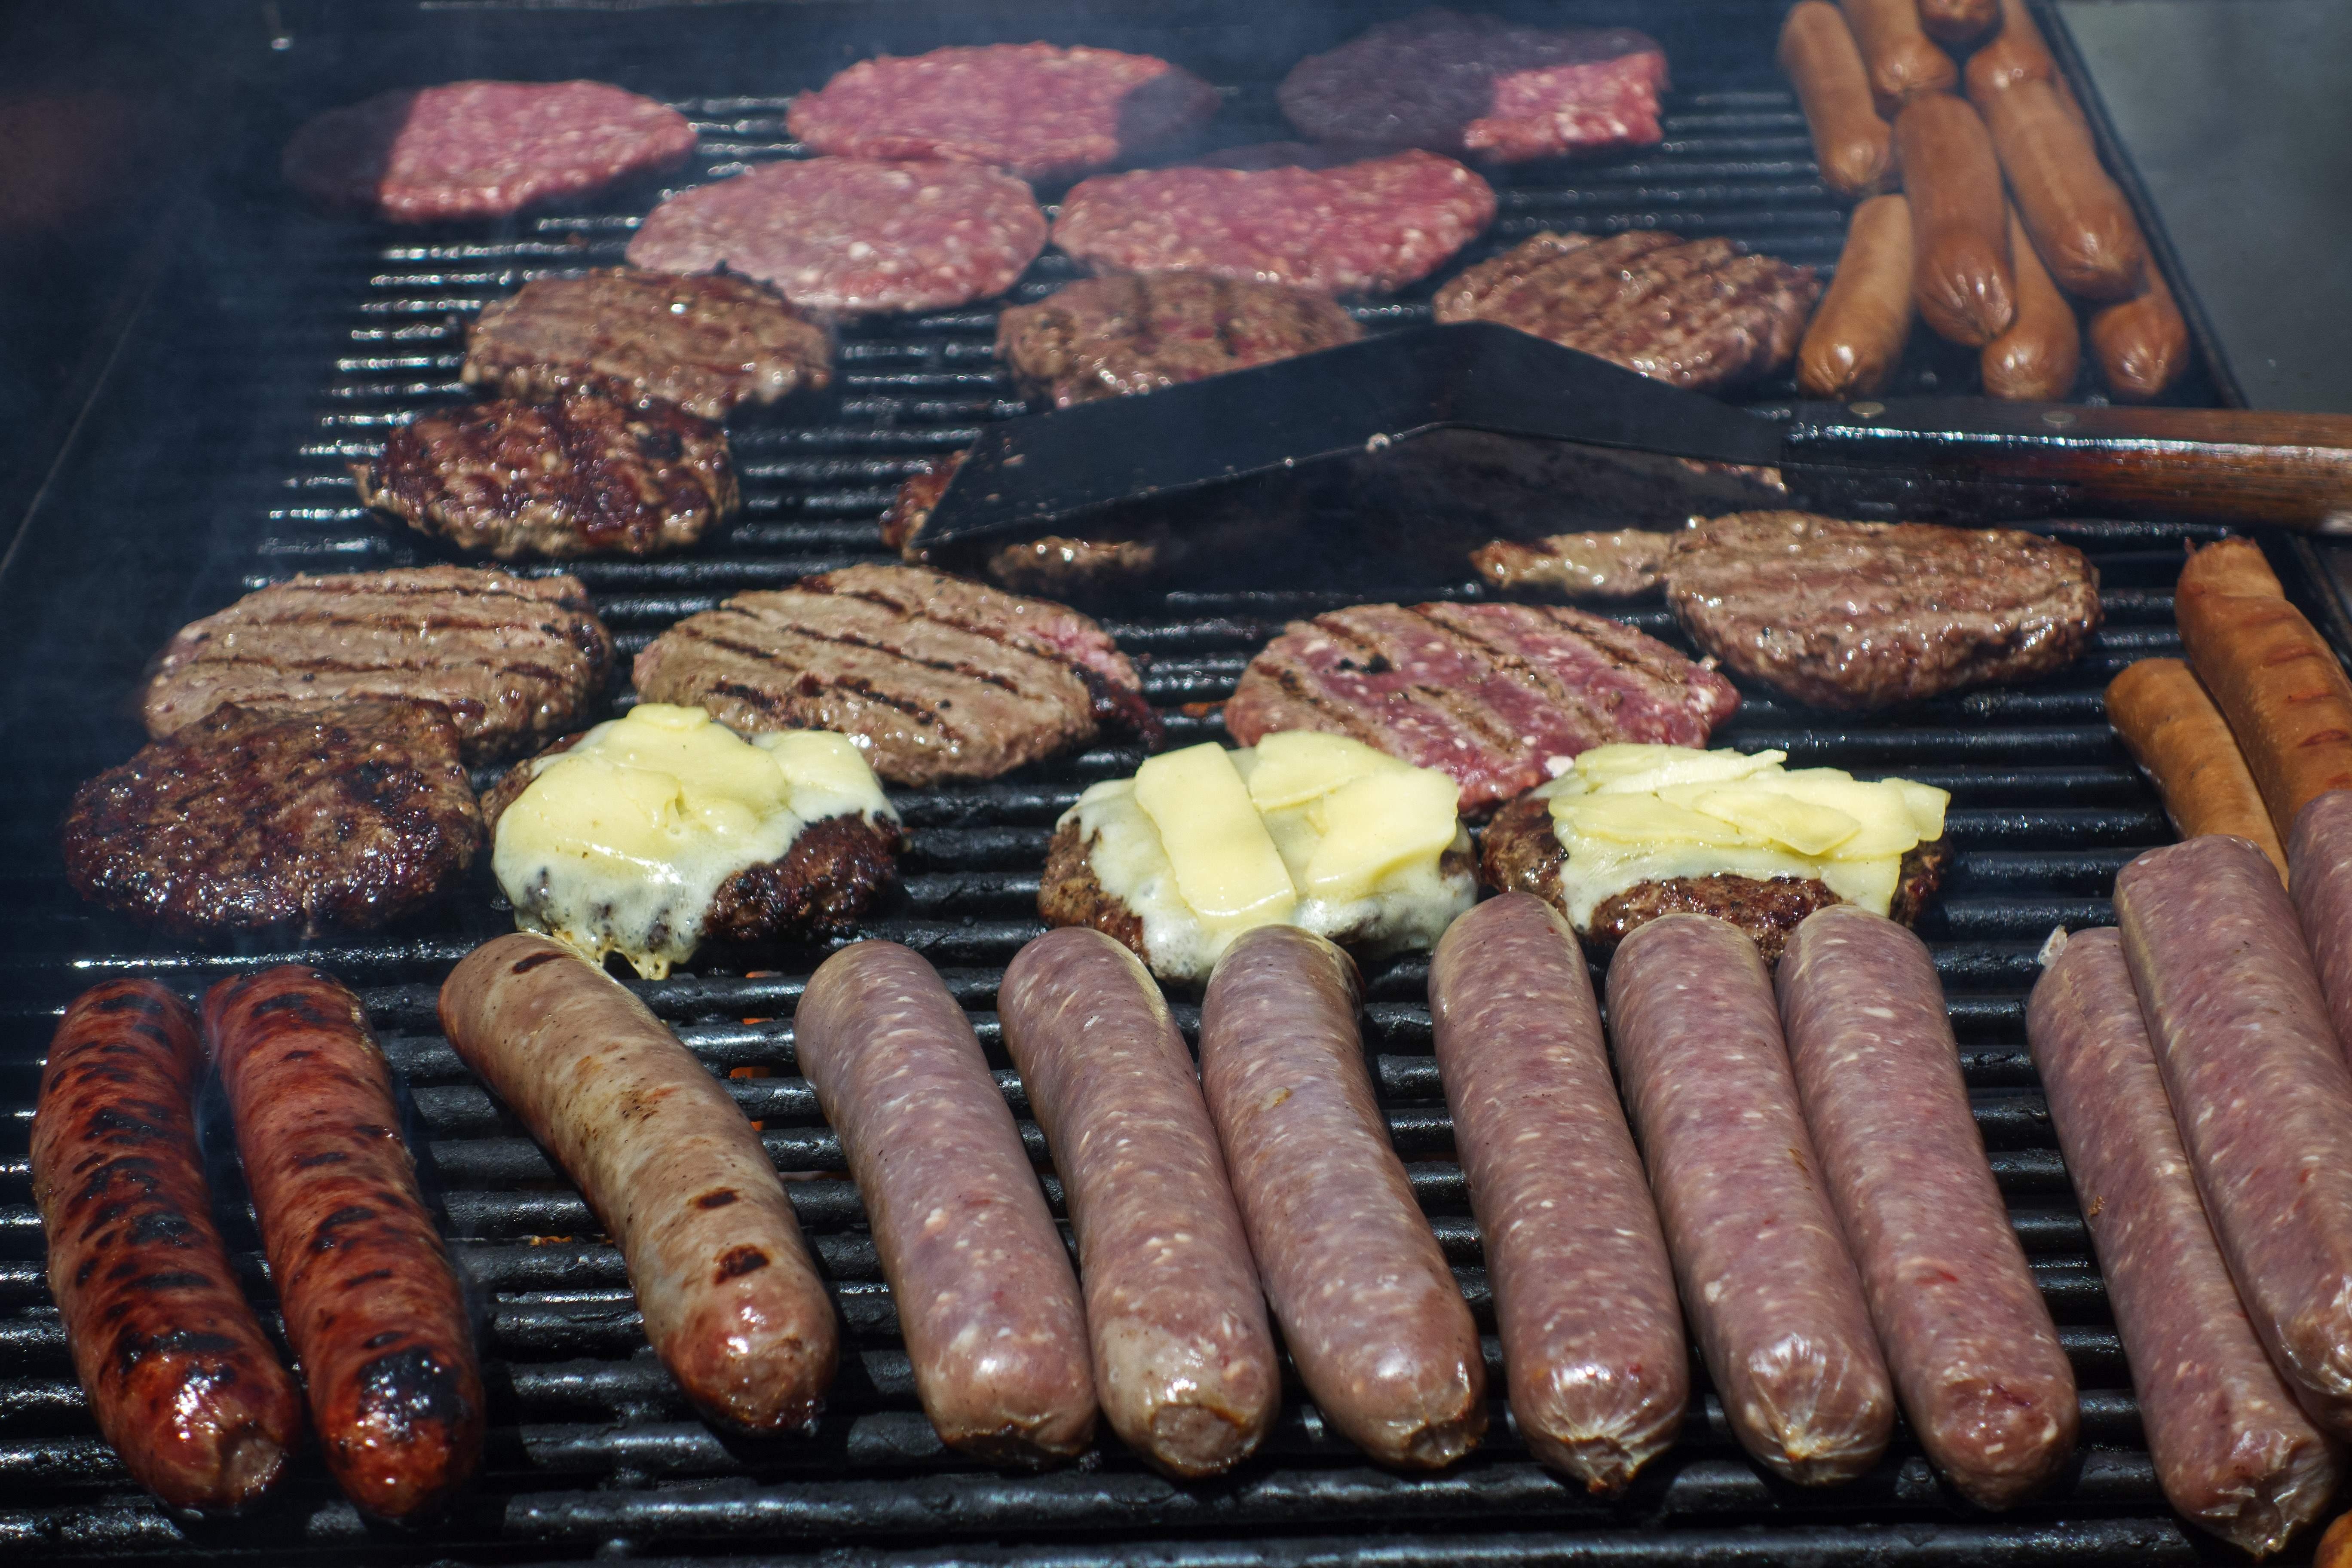 A grill with rows of hamburgers and sausages.